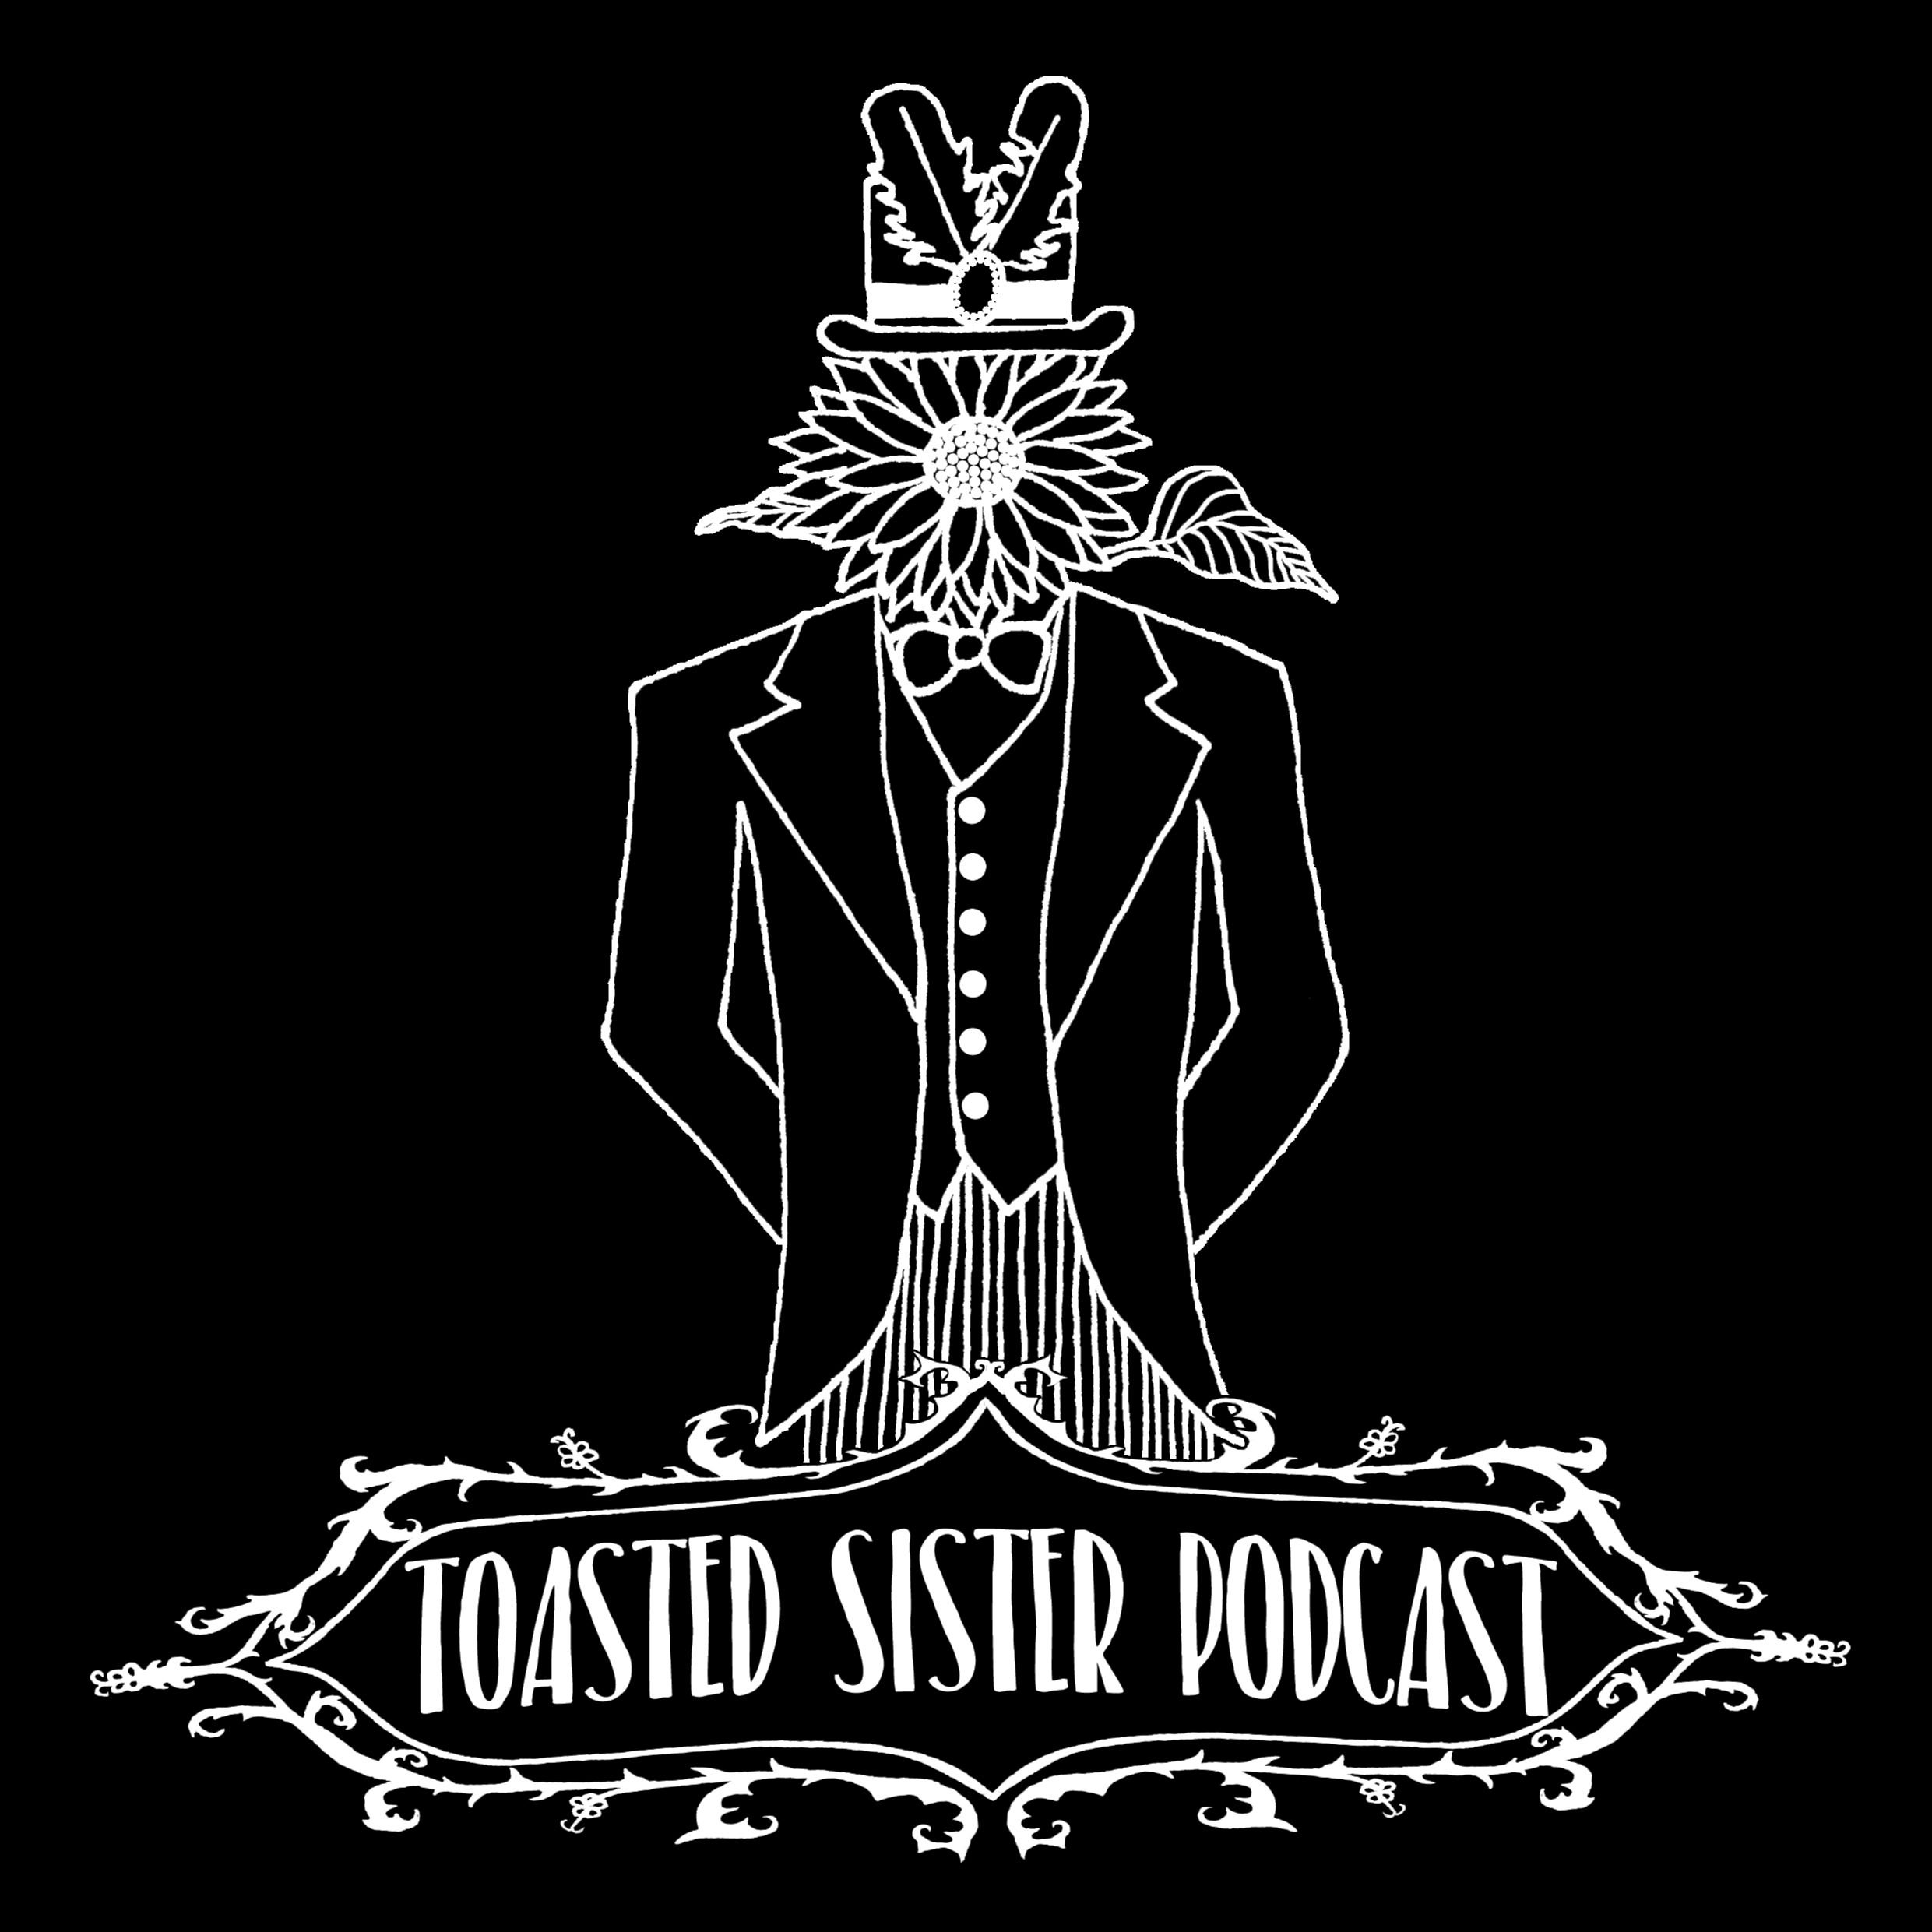 Toasted Sister Podcast